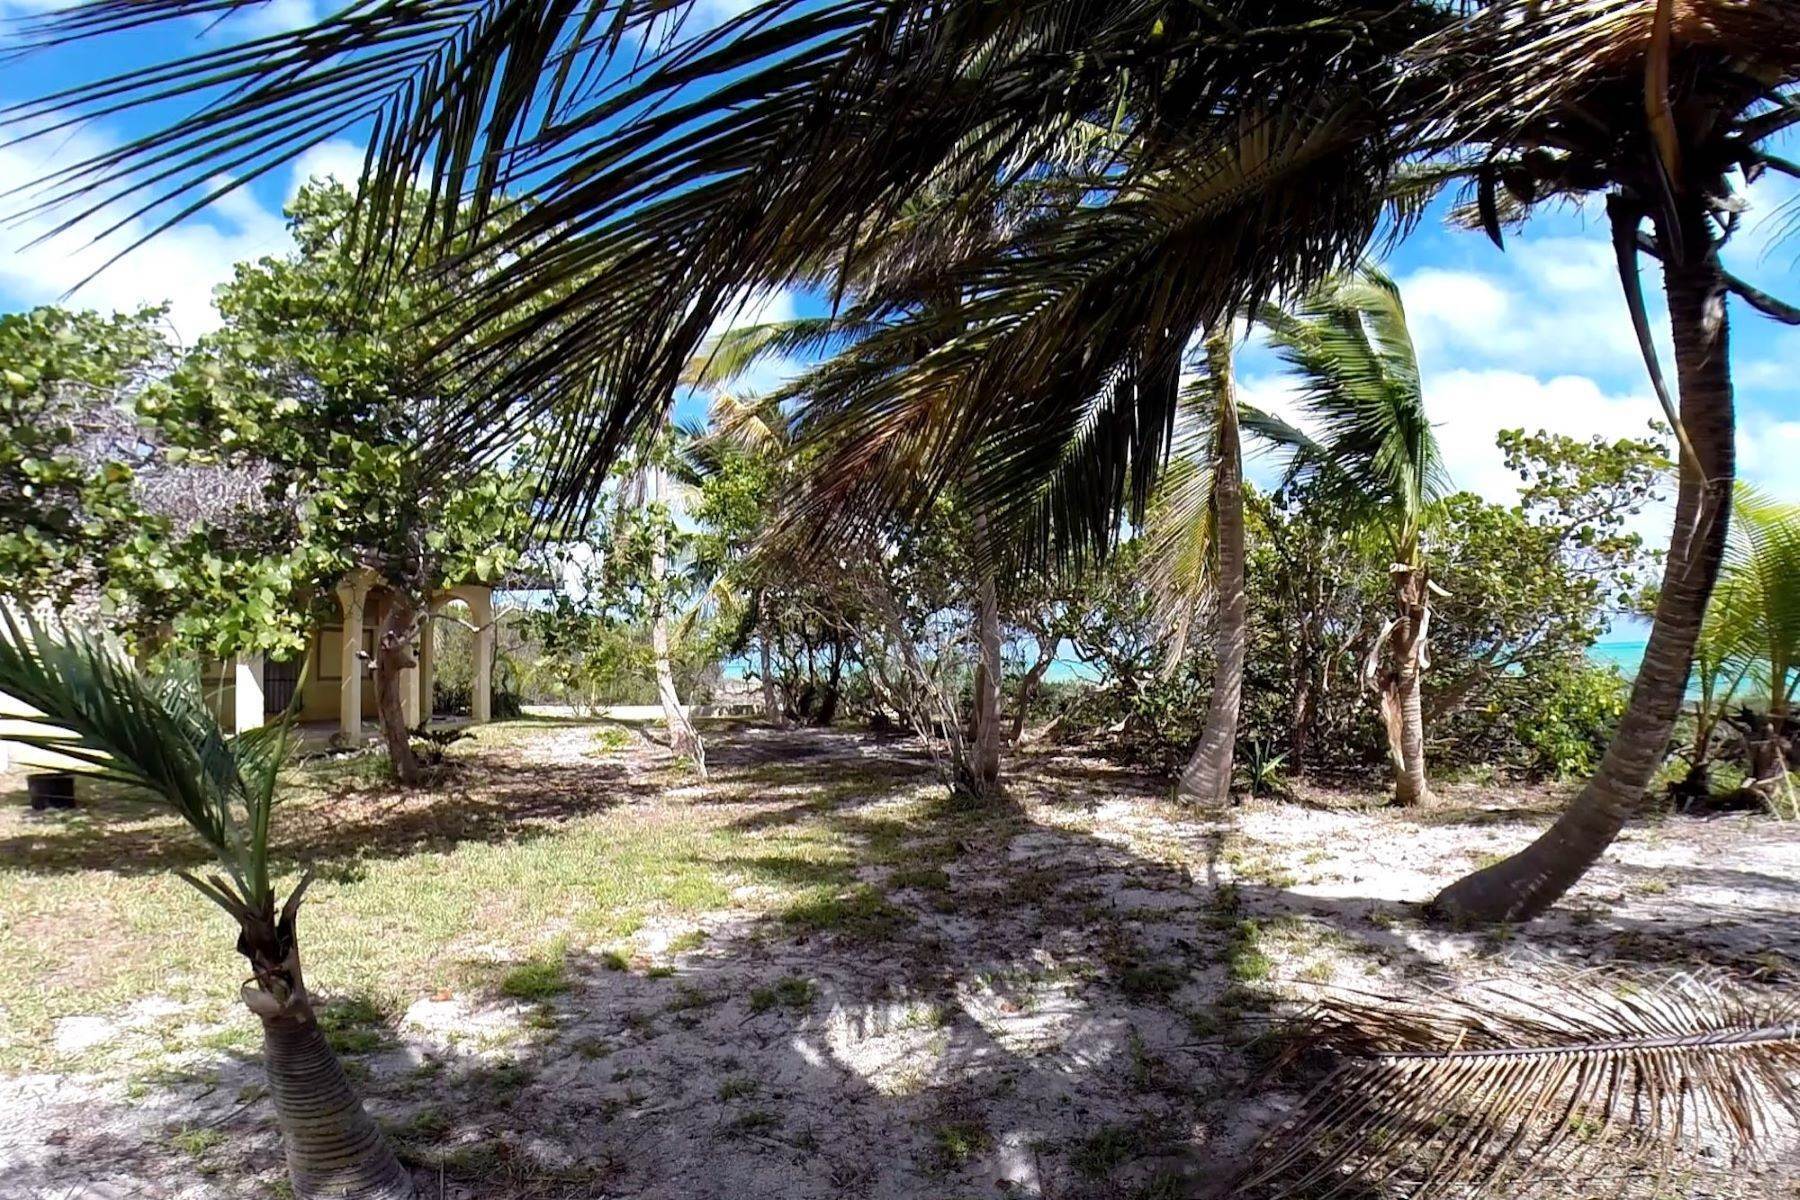 11. Private Islands for Sale at Swain's Cay, Private Island off Andros Mangrove Cay, Andros, Bahamas